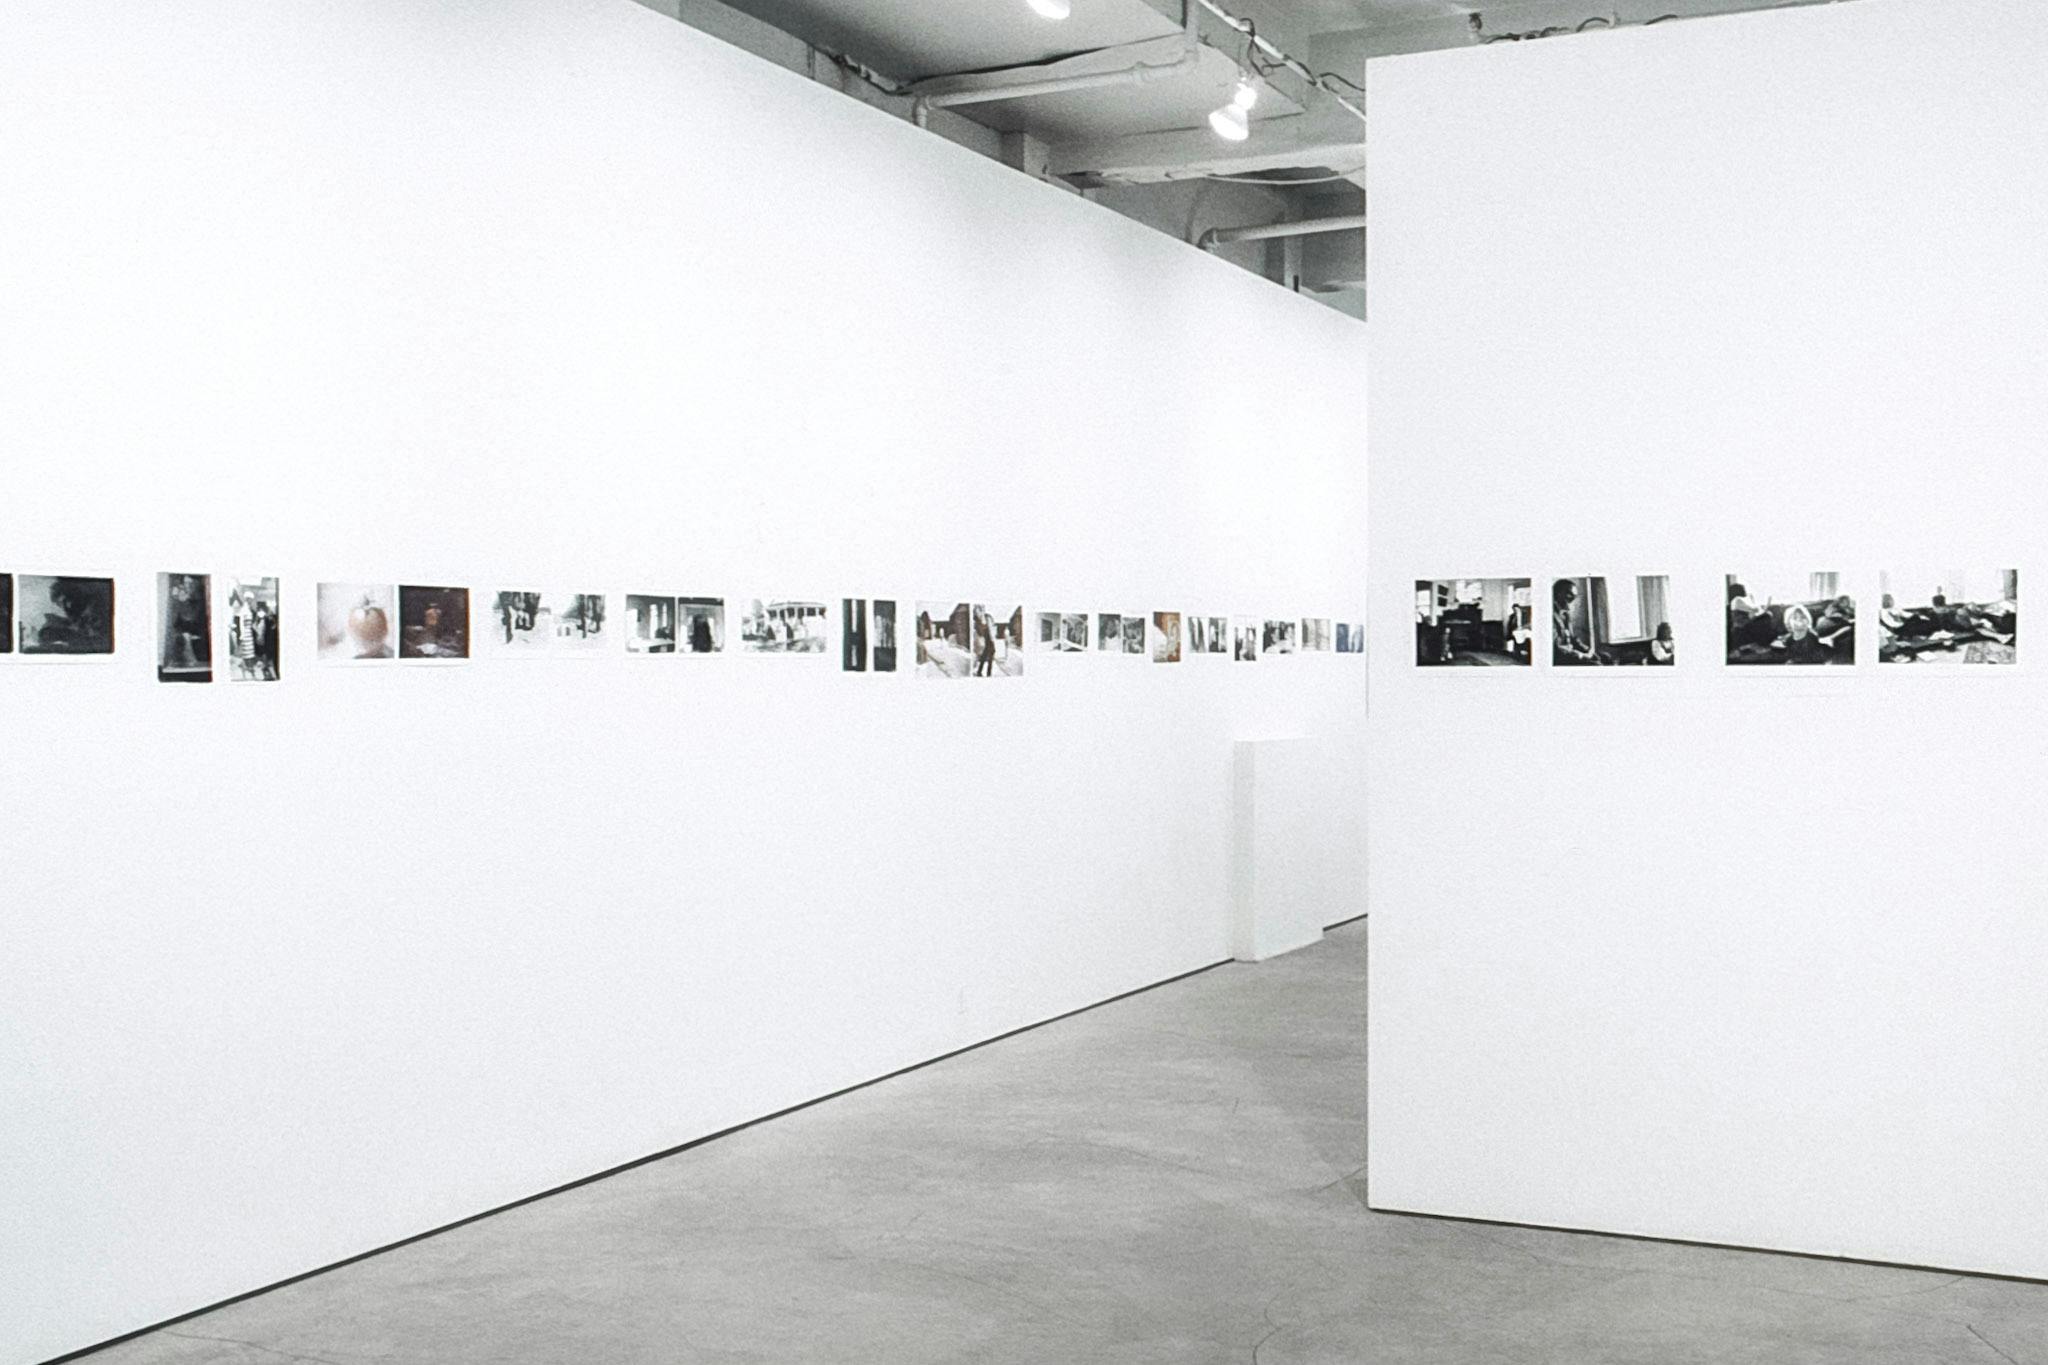 The view of a gallery space, interrupted by a wall creating a median. Across the walls, there are several colour and black and white photos arranged in a line. The photos vary in size and orientation.